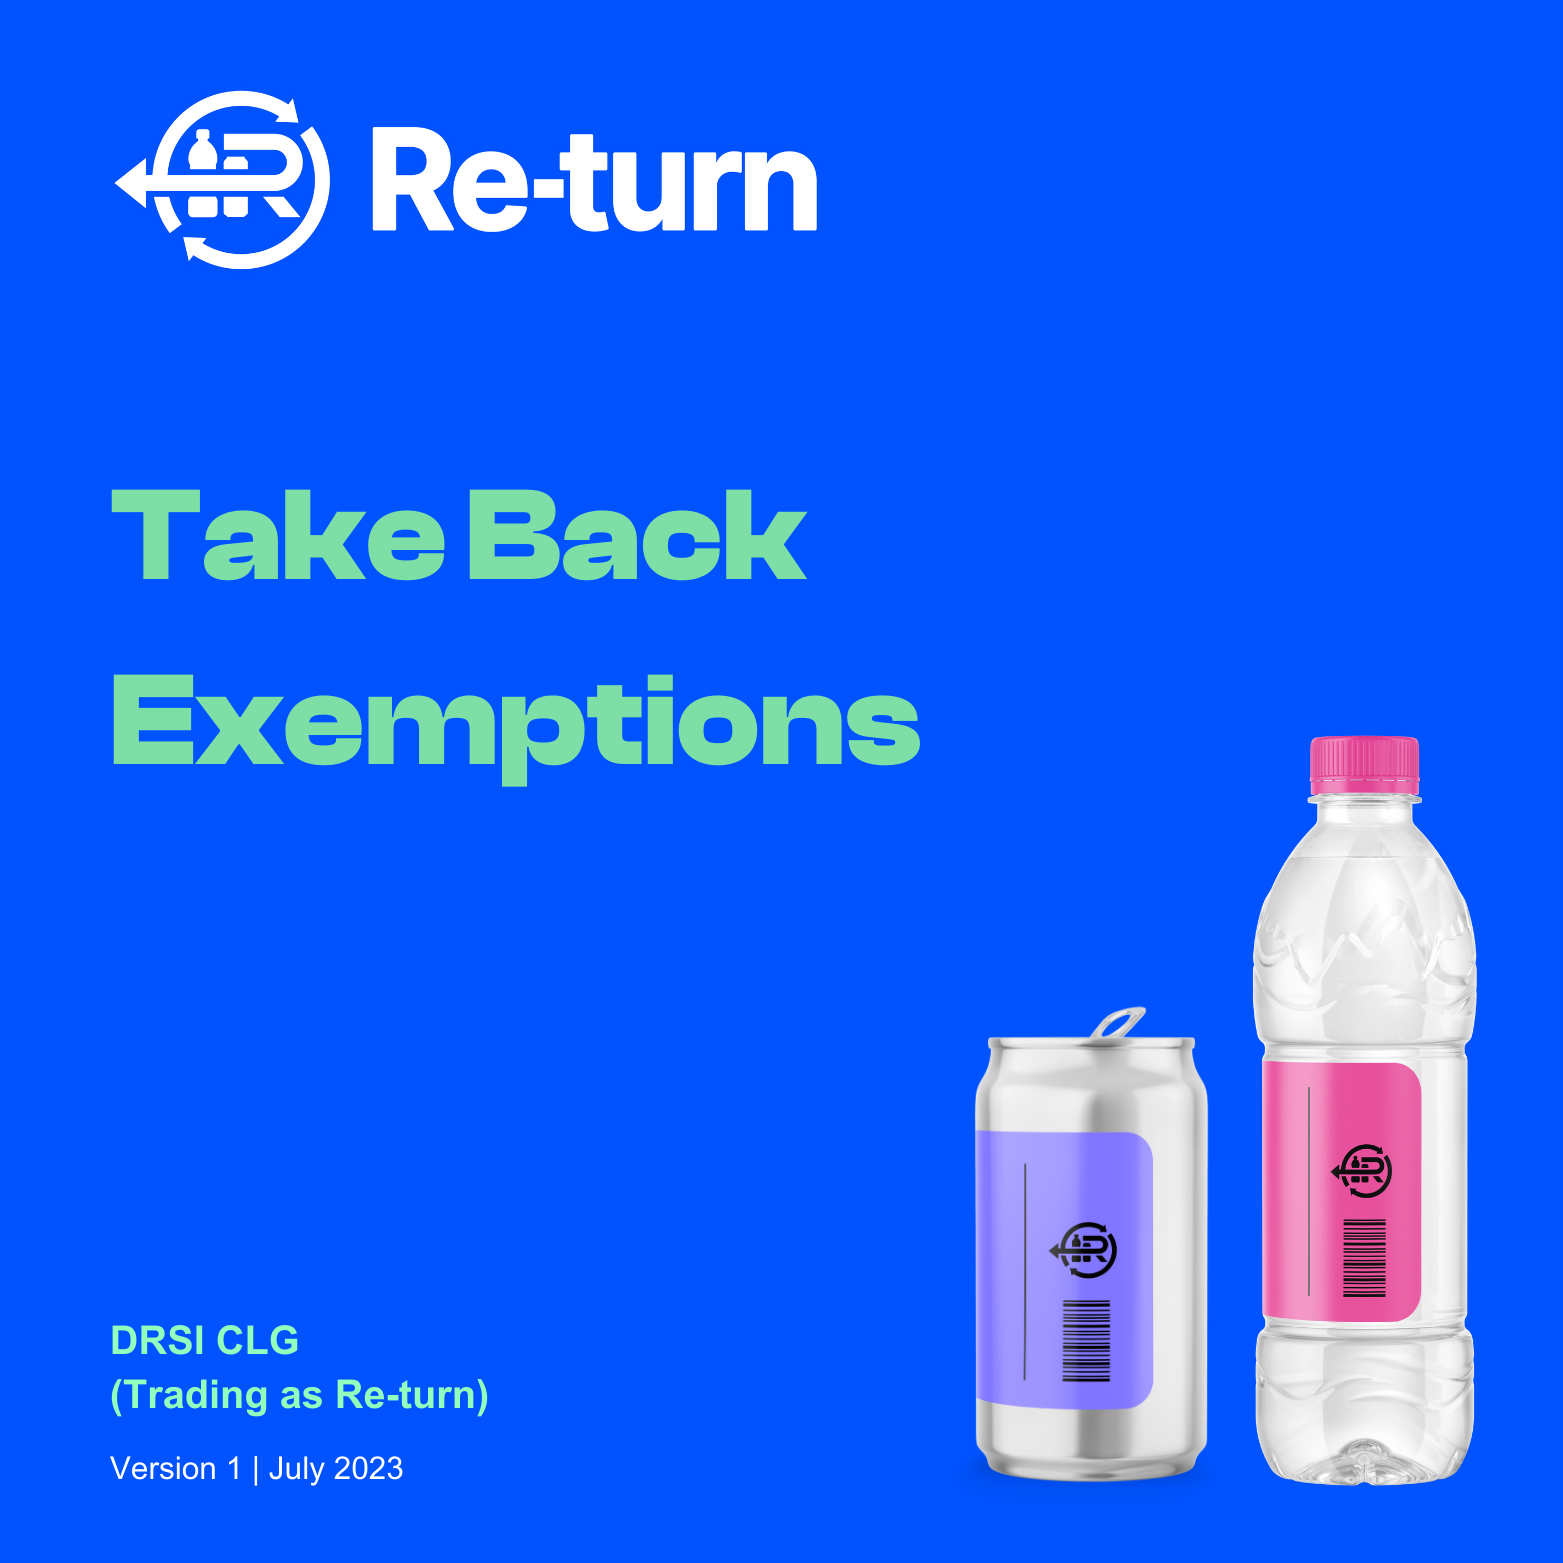 Take Back Exemptions Announced - Re-Turn